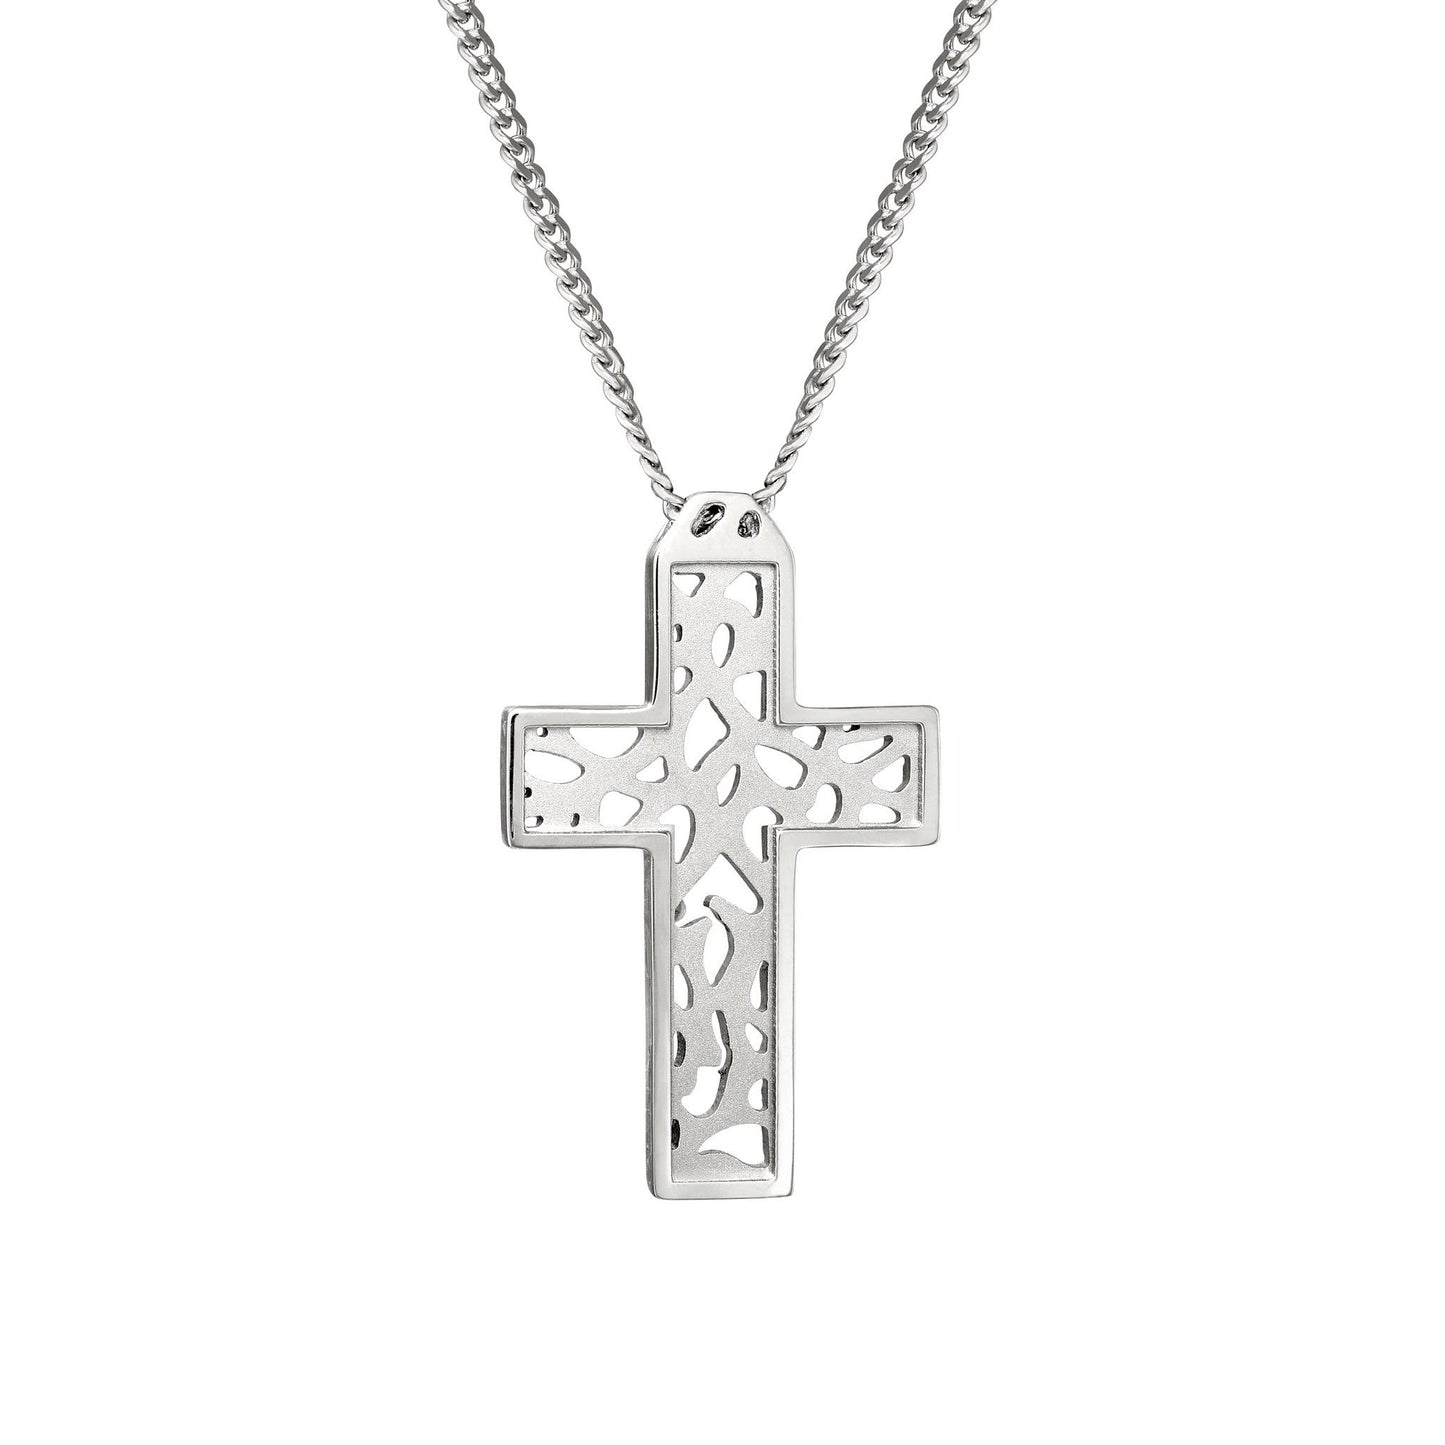 A stainless steel cutout pattern men's cross necklace displayed on a neutral white background.